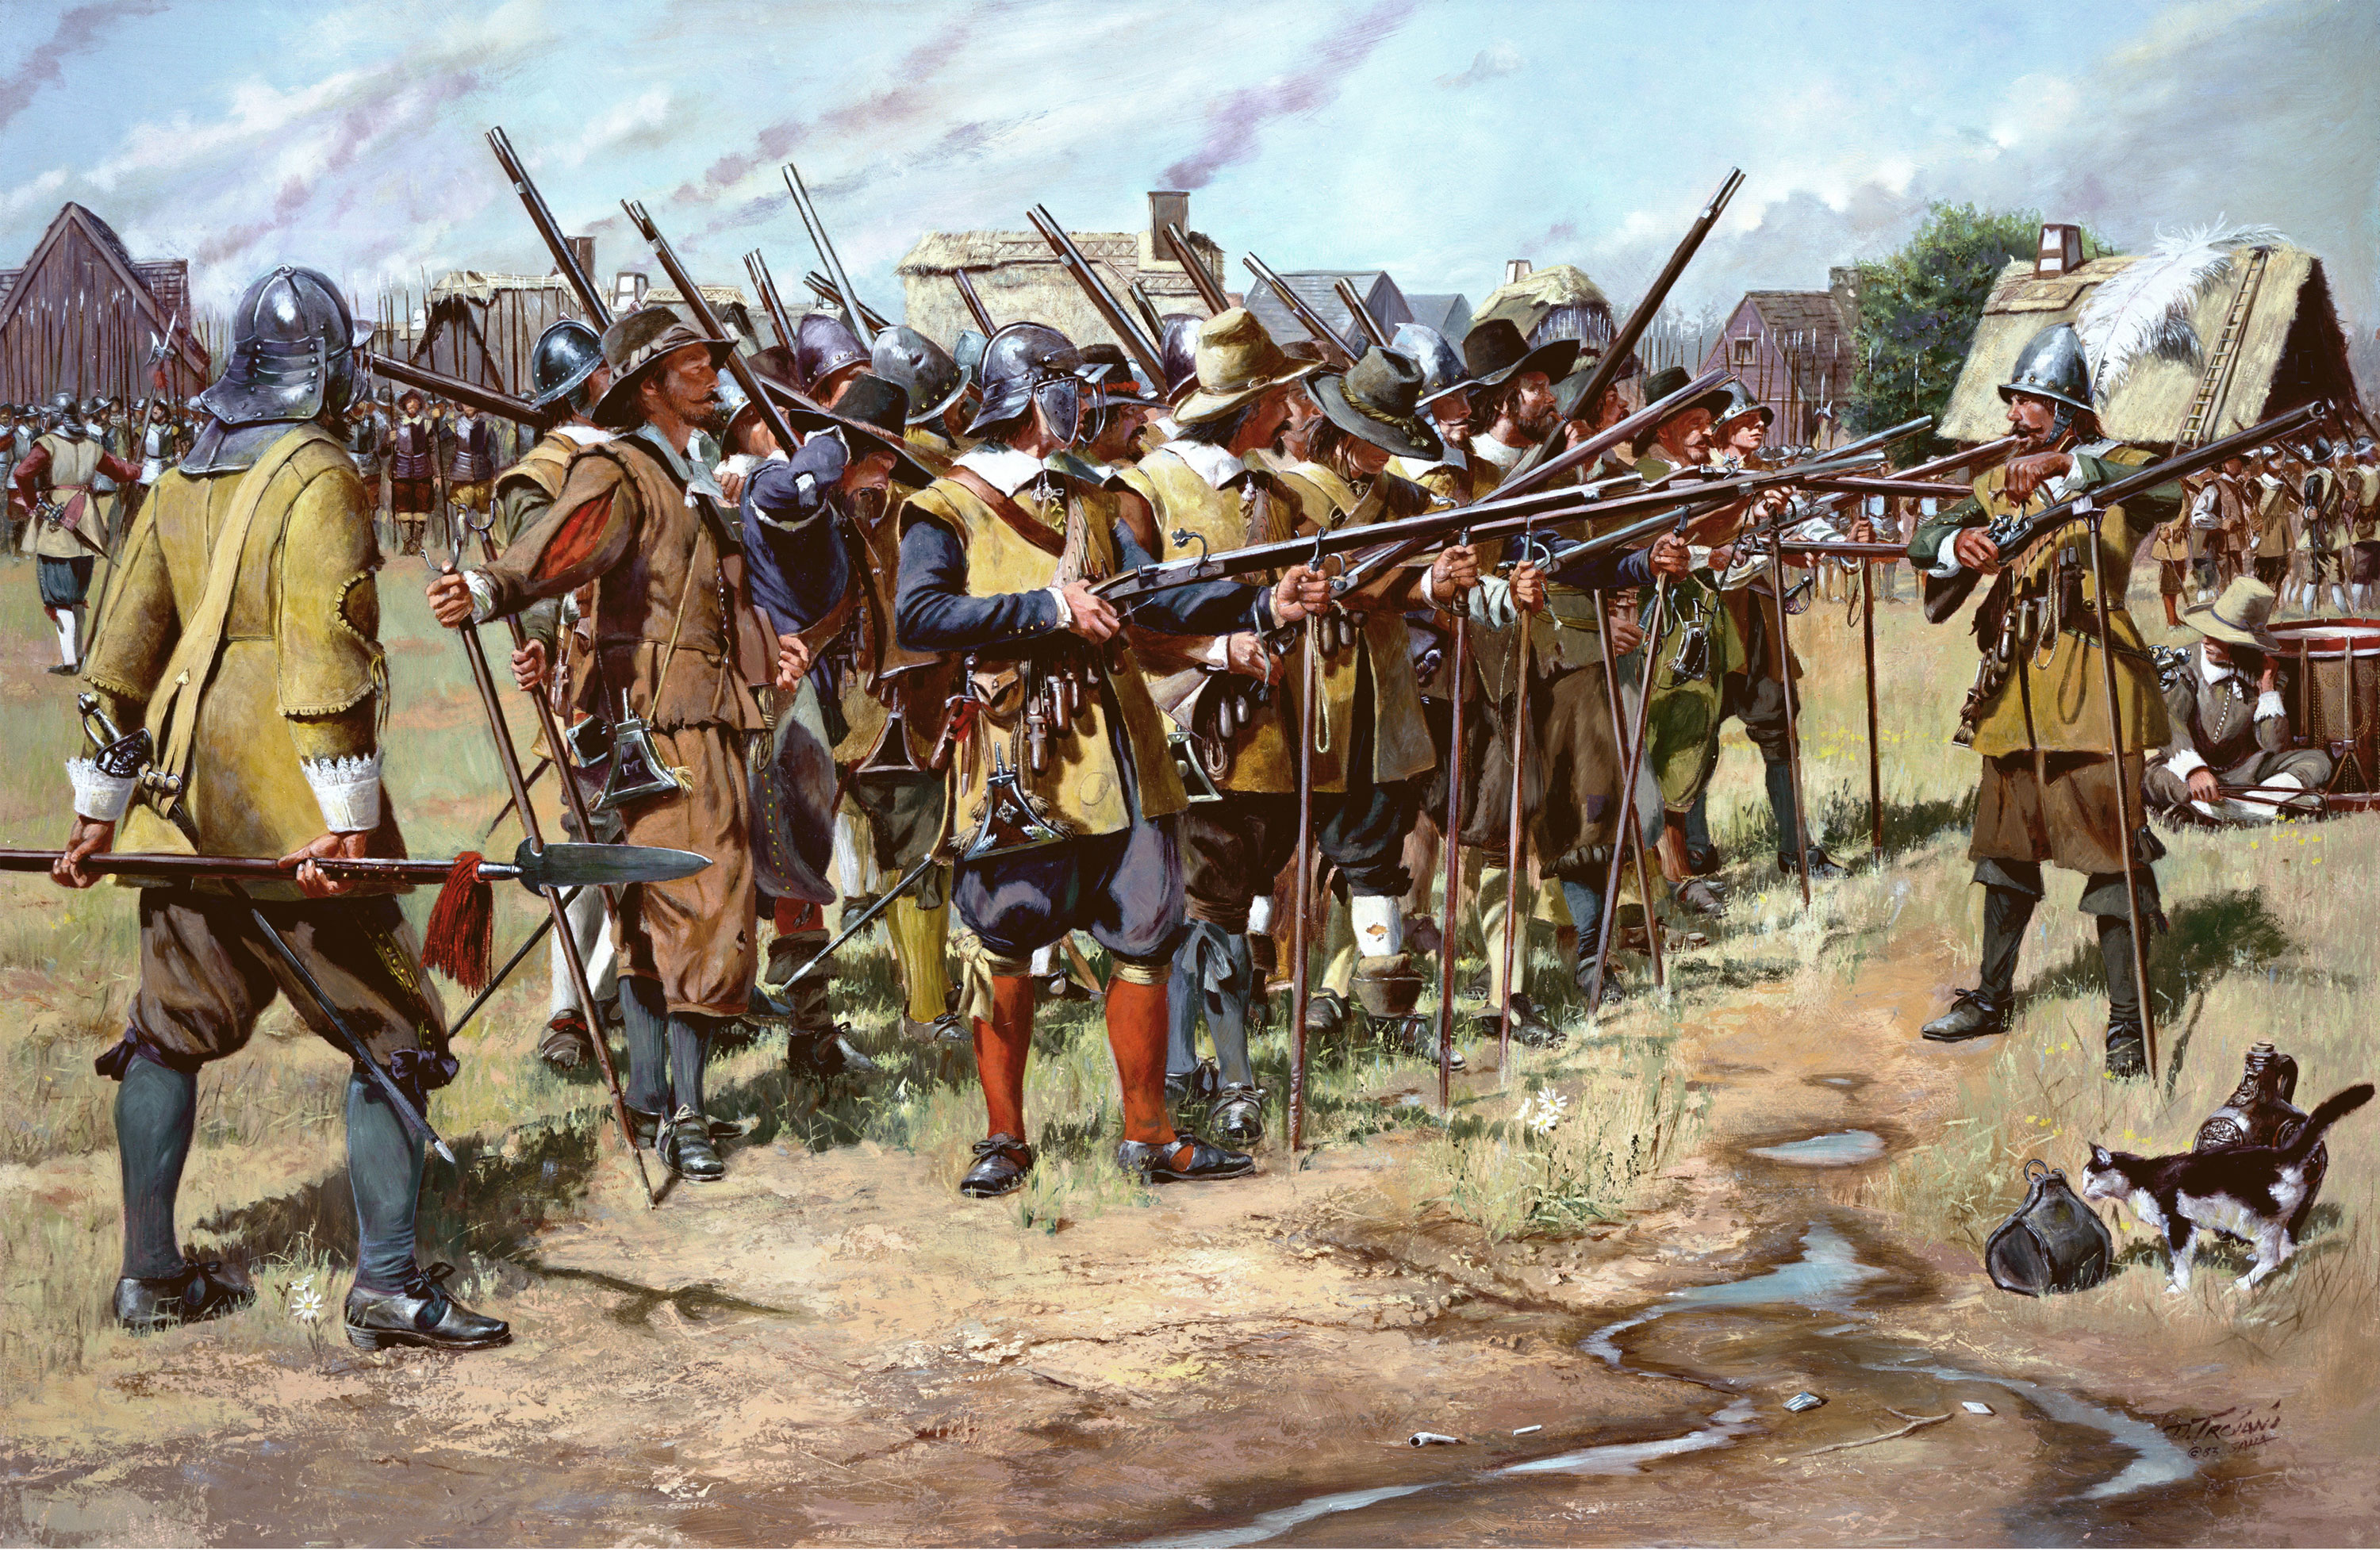 Massachusetts Bay Colony militia. This event took place on December 13, 1636 and the Massachusetts General Court ordered the organization of the Colony's militia companies into three regiments: The North, South and East Regiments, by National Guard Bureau Heritage Series